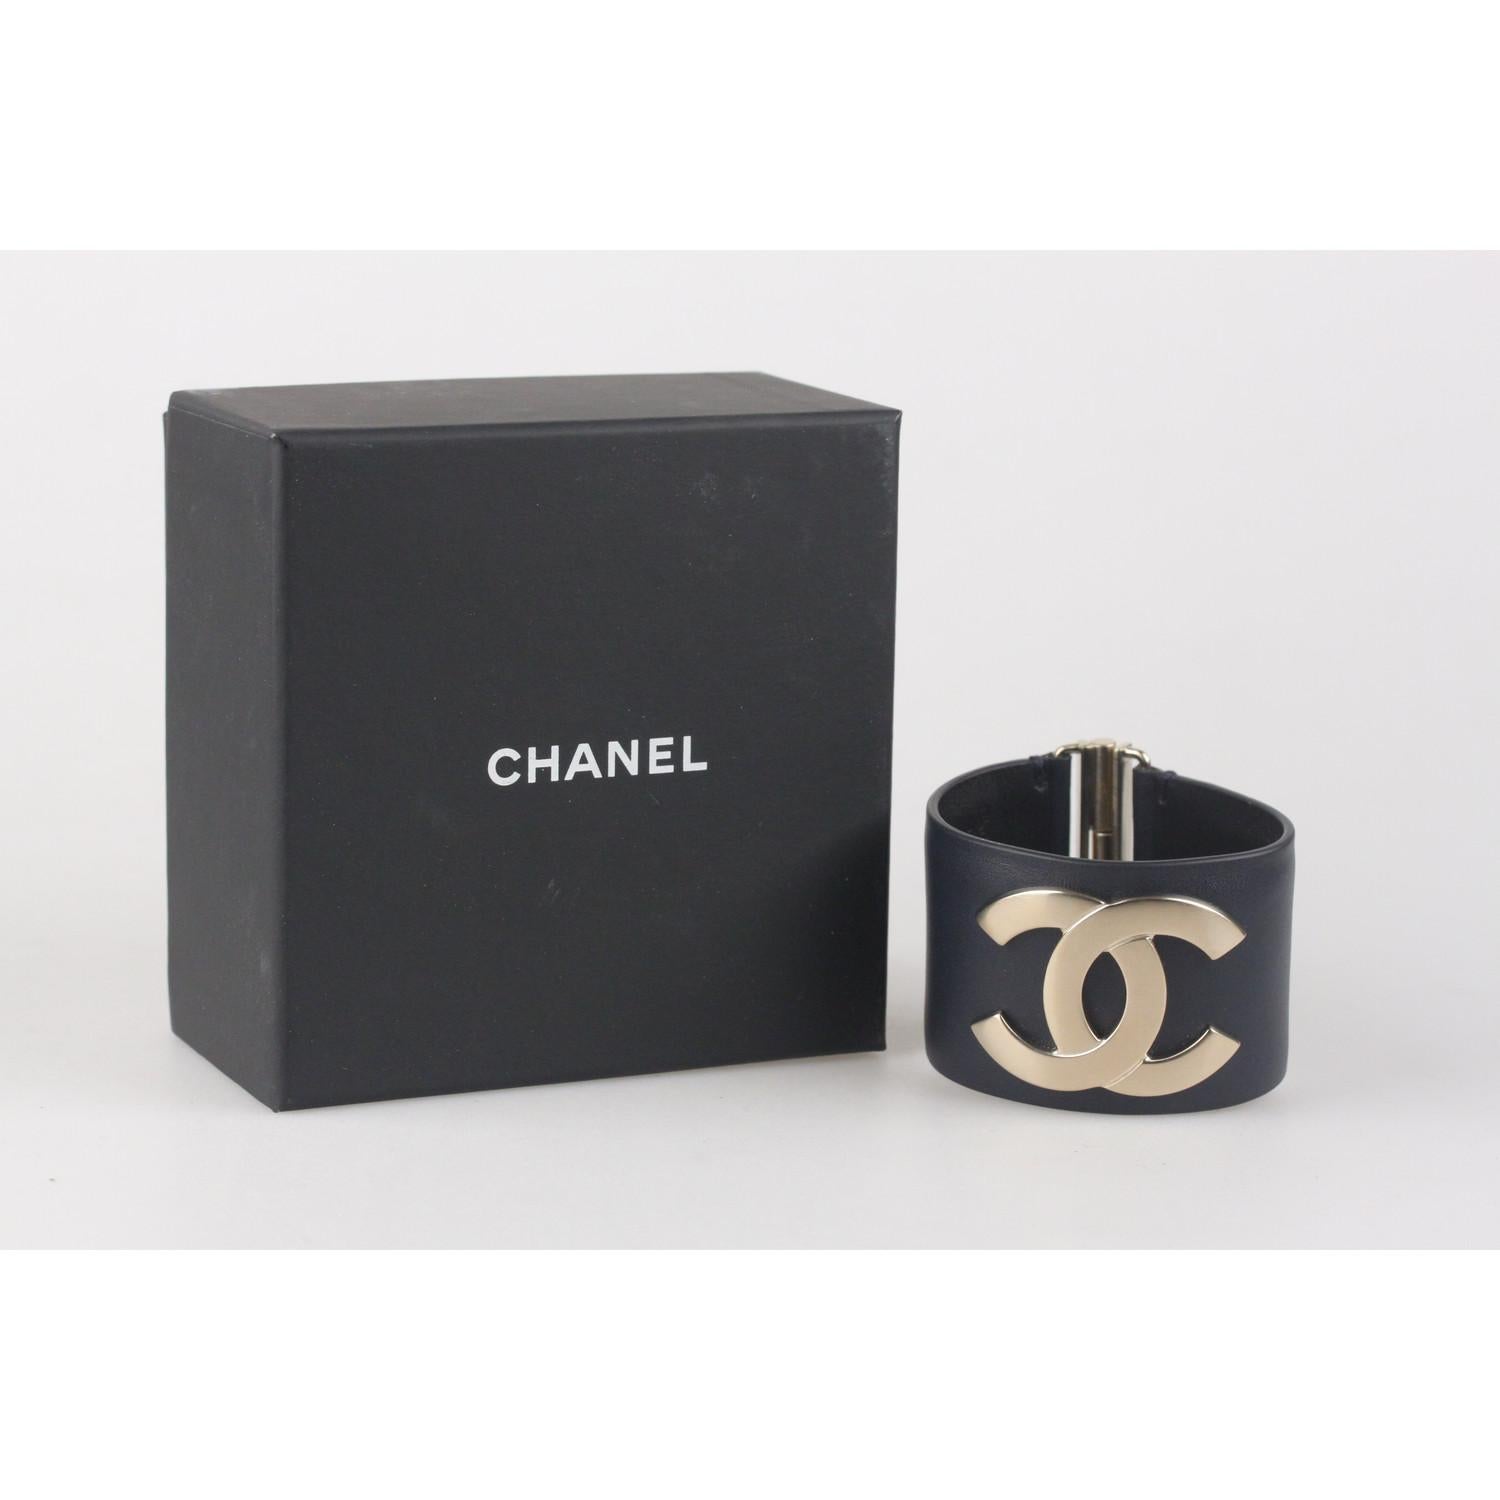 - Exclusive Edition December 2017 - Limited edition from the Cruise 2018 collection
- Light Gold Metal Chanel - CC logo at center
- Dark navy blue calfskin leather 
- Slide lock closure with bracelet catch
- Made in Italy
- Stamped 'CHANEL C18 CC C